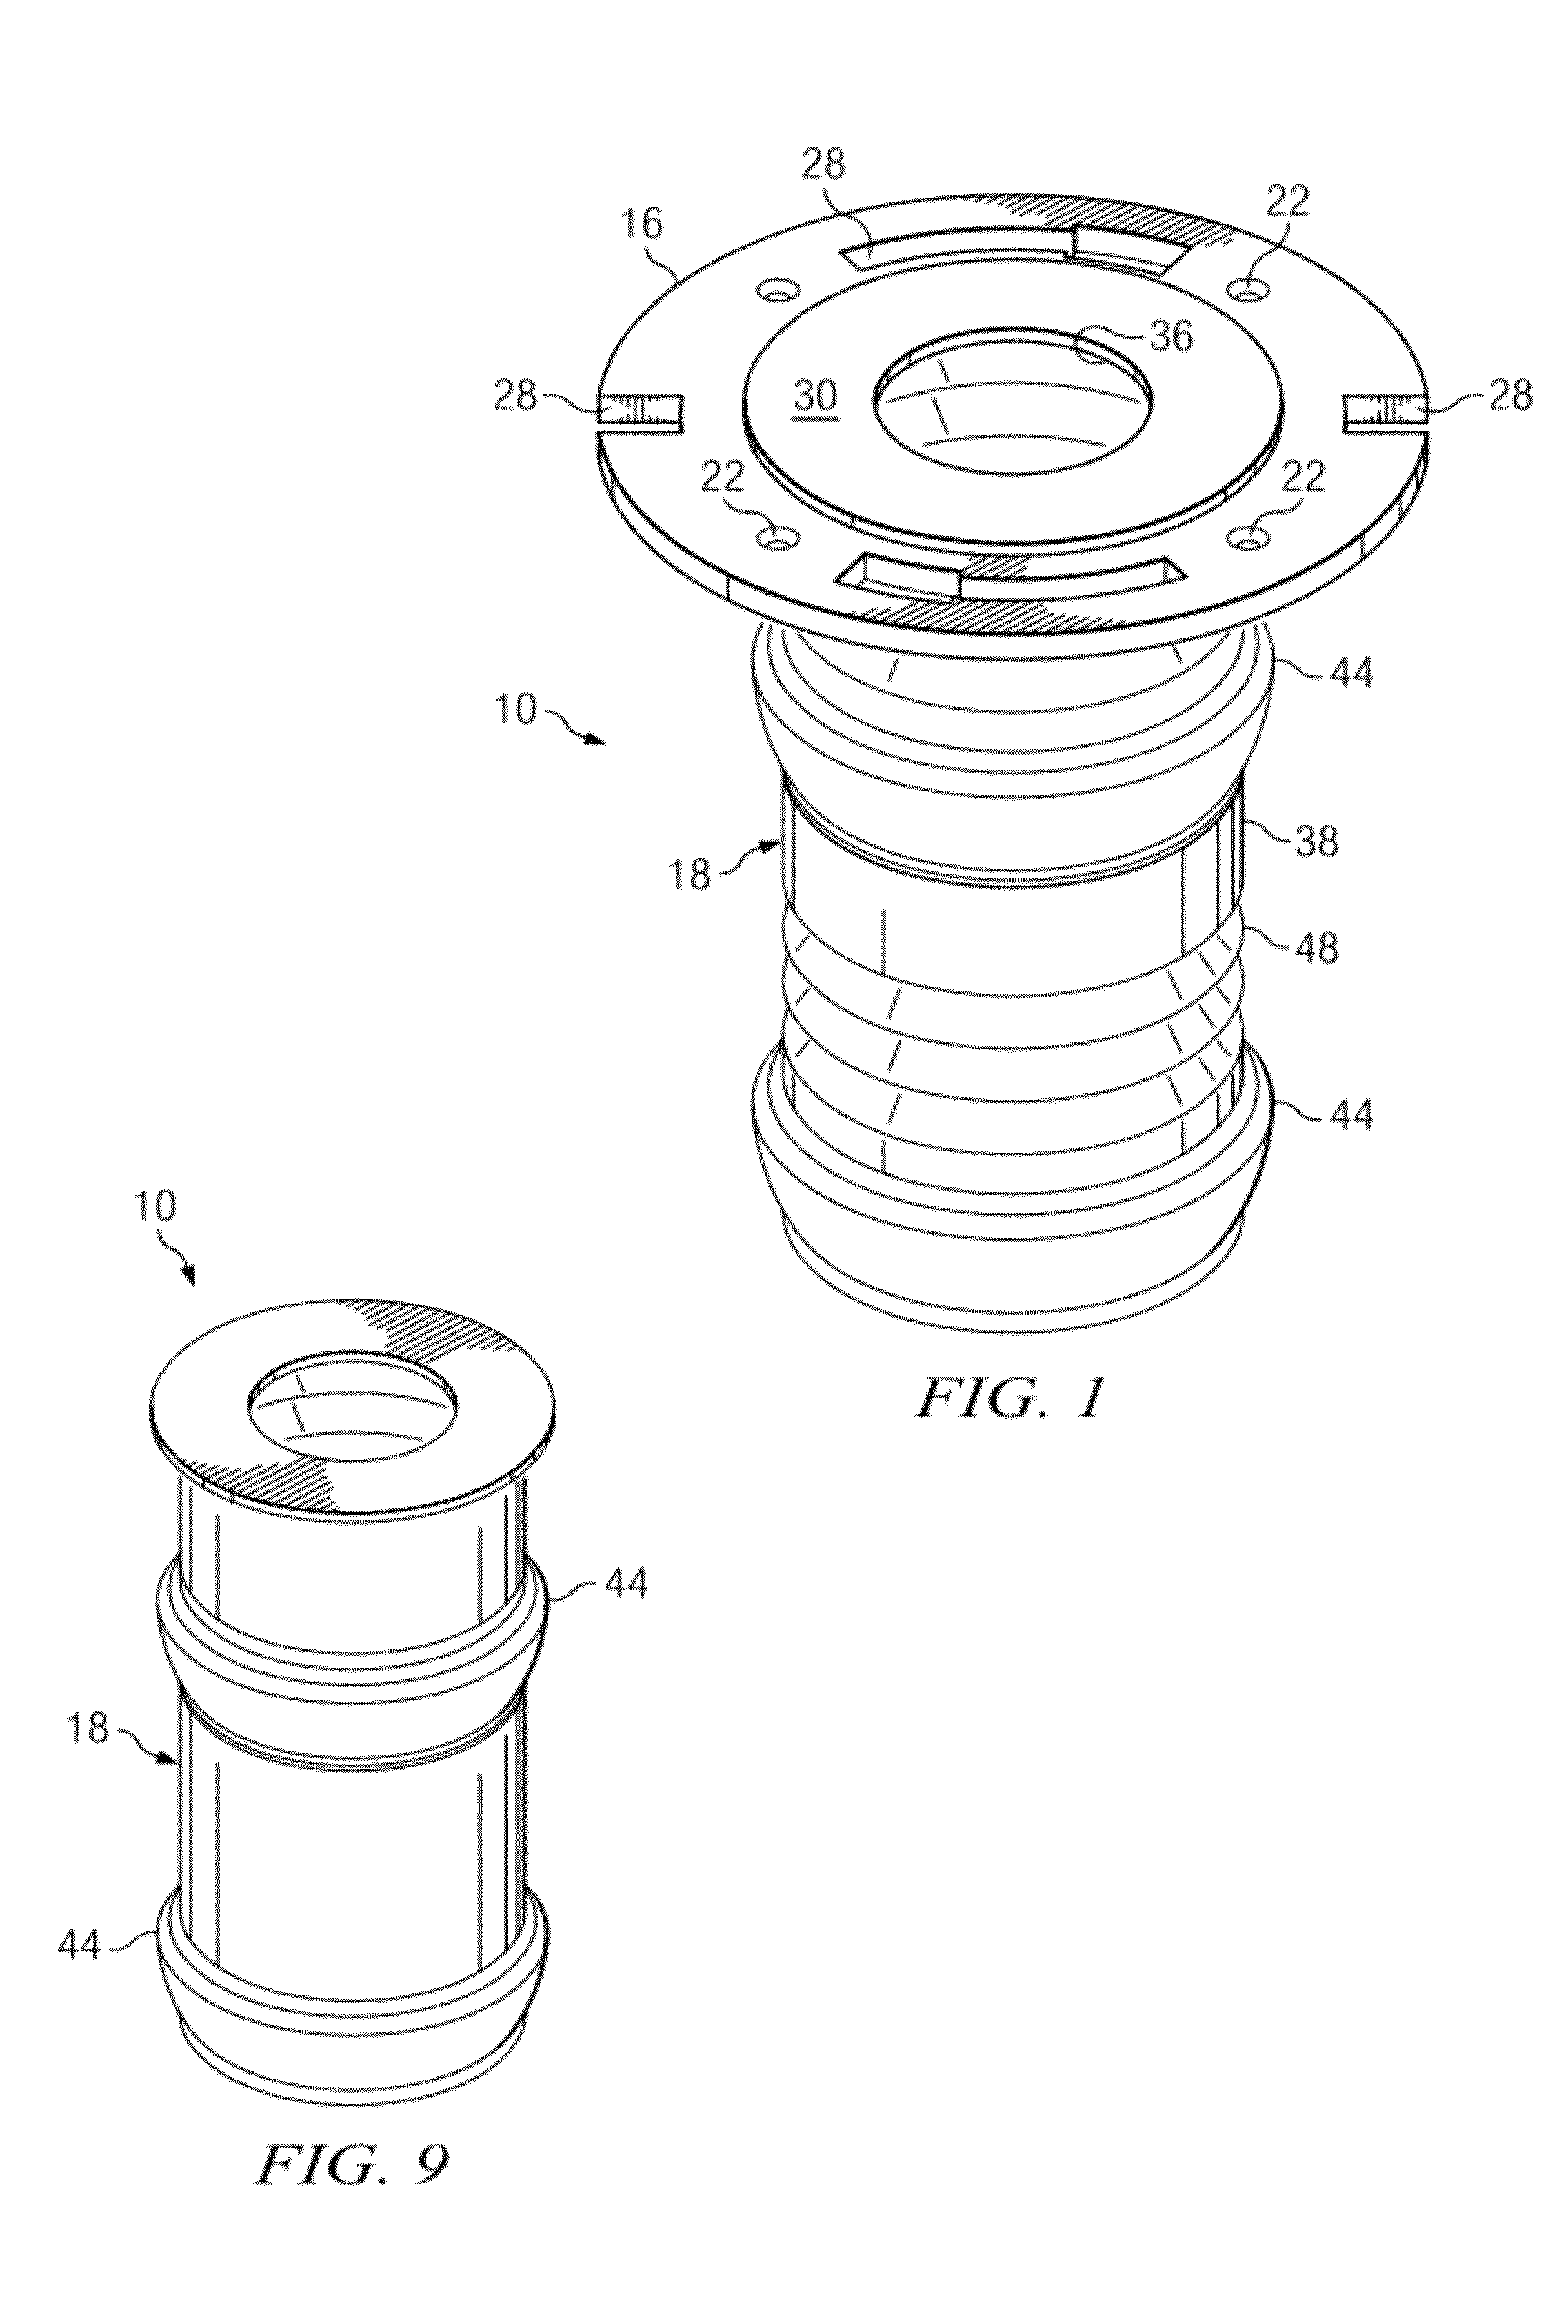 Flange system with modular spacers